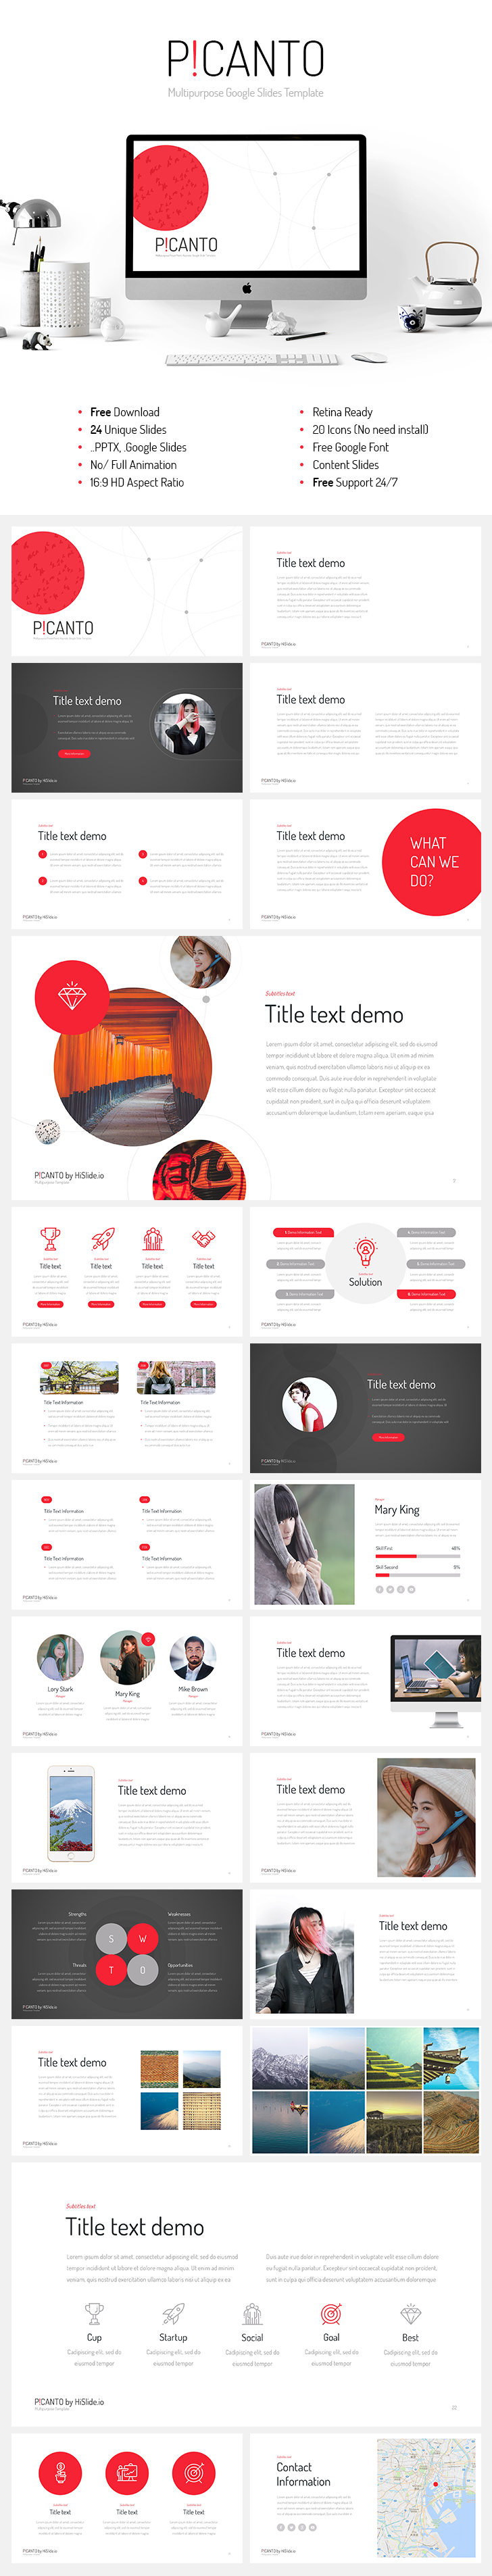 01 Picanto Google Slides template free download